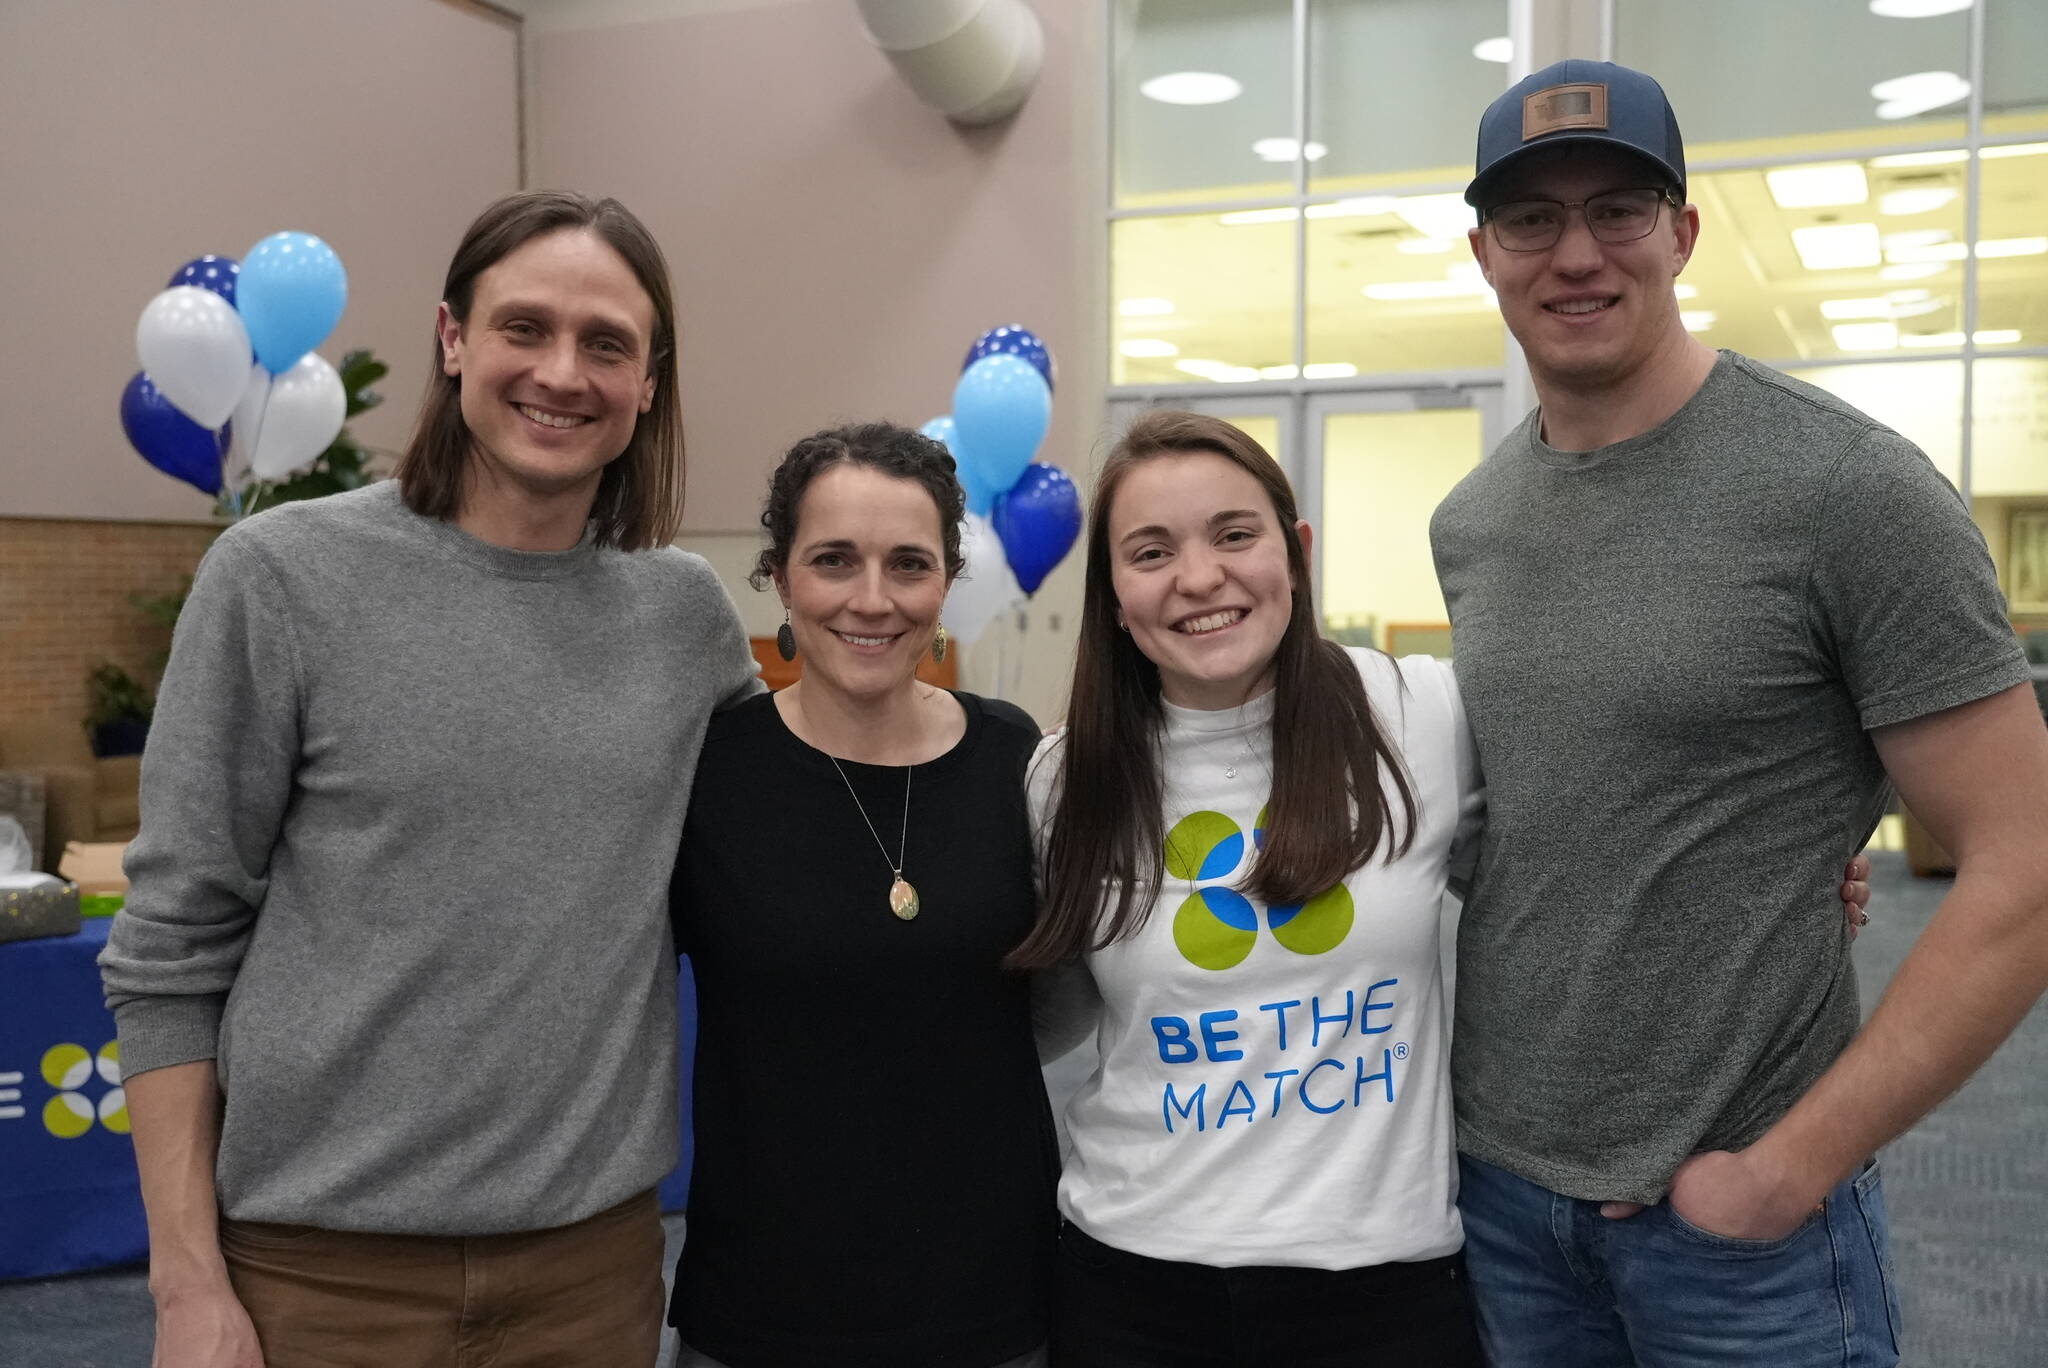 Ryan and Rebecca Bellmore, left, pose with Shawen Bueckers and her husband Mathew Bueckers at a Be the Match event at Brigham Young University in 2022. (Courtesy photo / Be the Match)